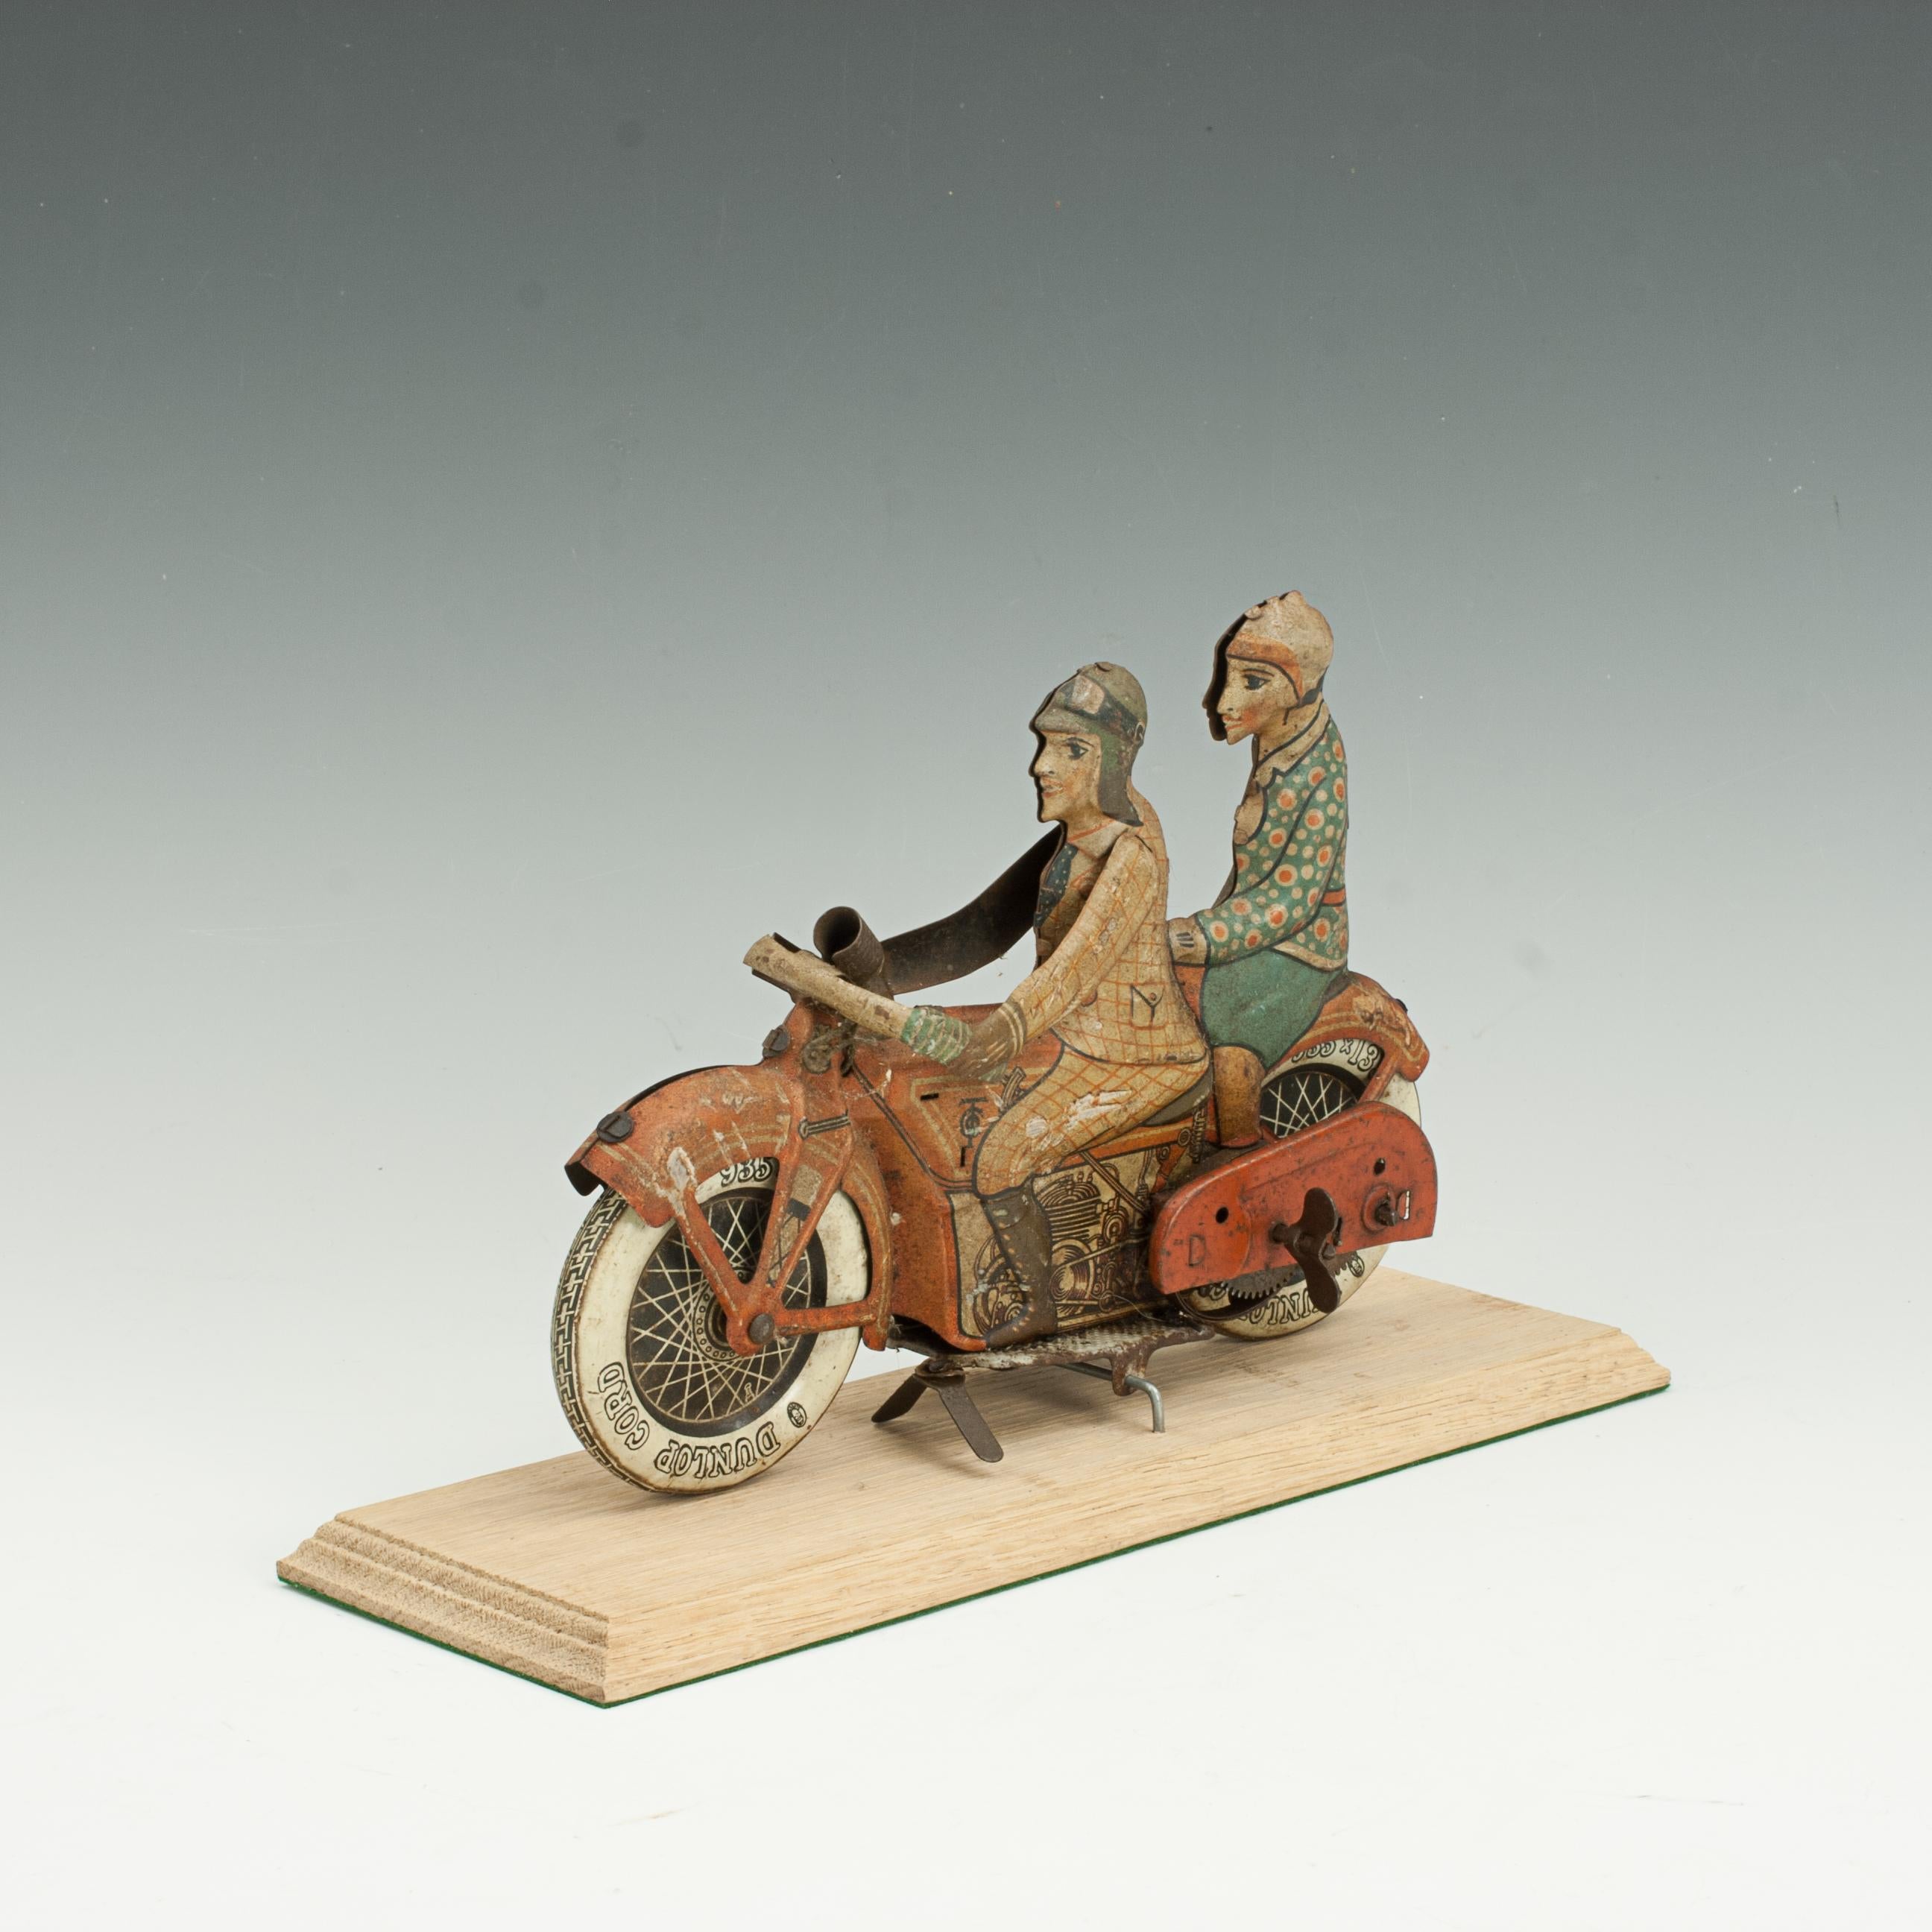 Tipp & Co Clockwork Motorcycle With Rider & Pillion Passenger For Sale 1